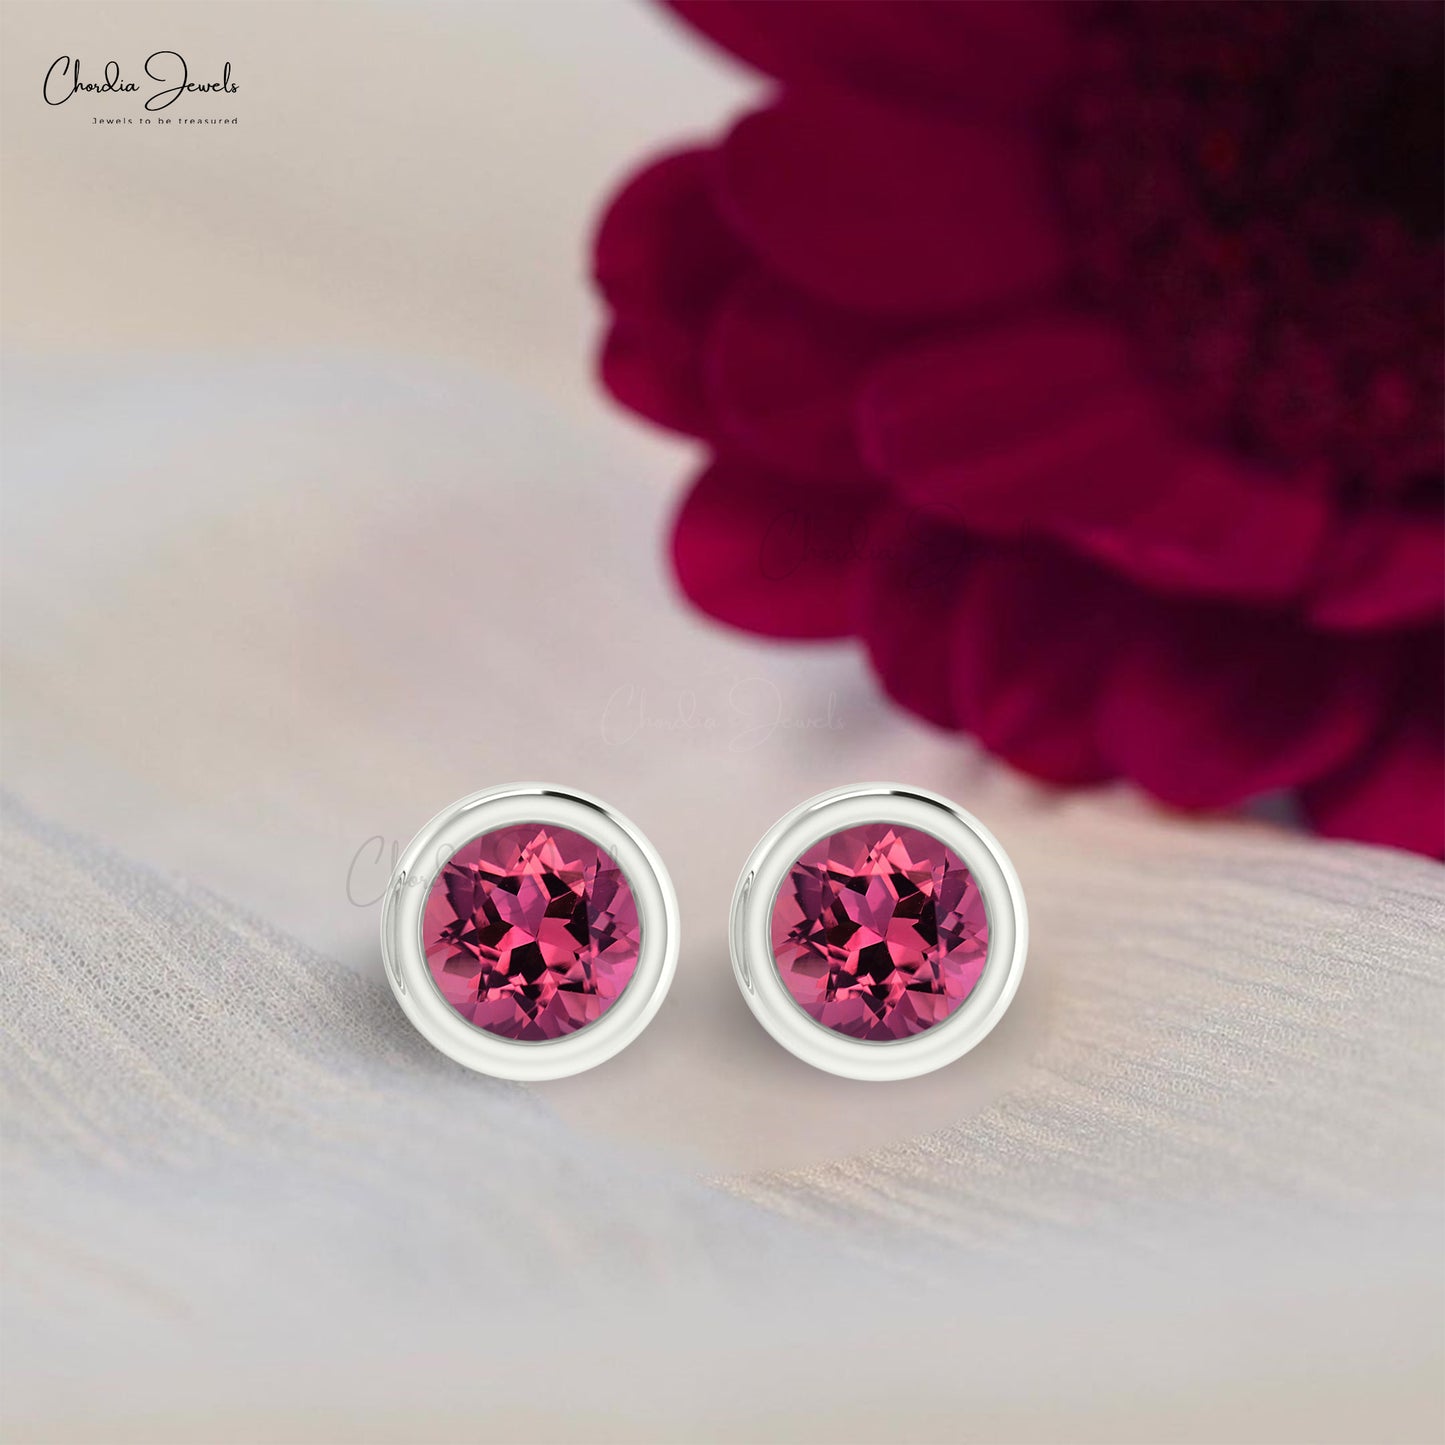 Genuine Pink Tourmaline Studs Earrings 5mm Round Cut Gemstone Solitaire Earrings 14k Solid Gold Studs For Her